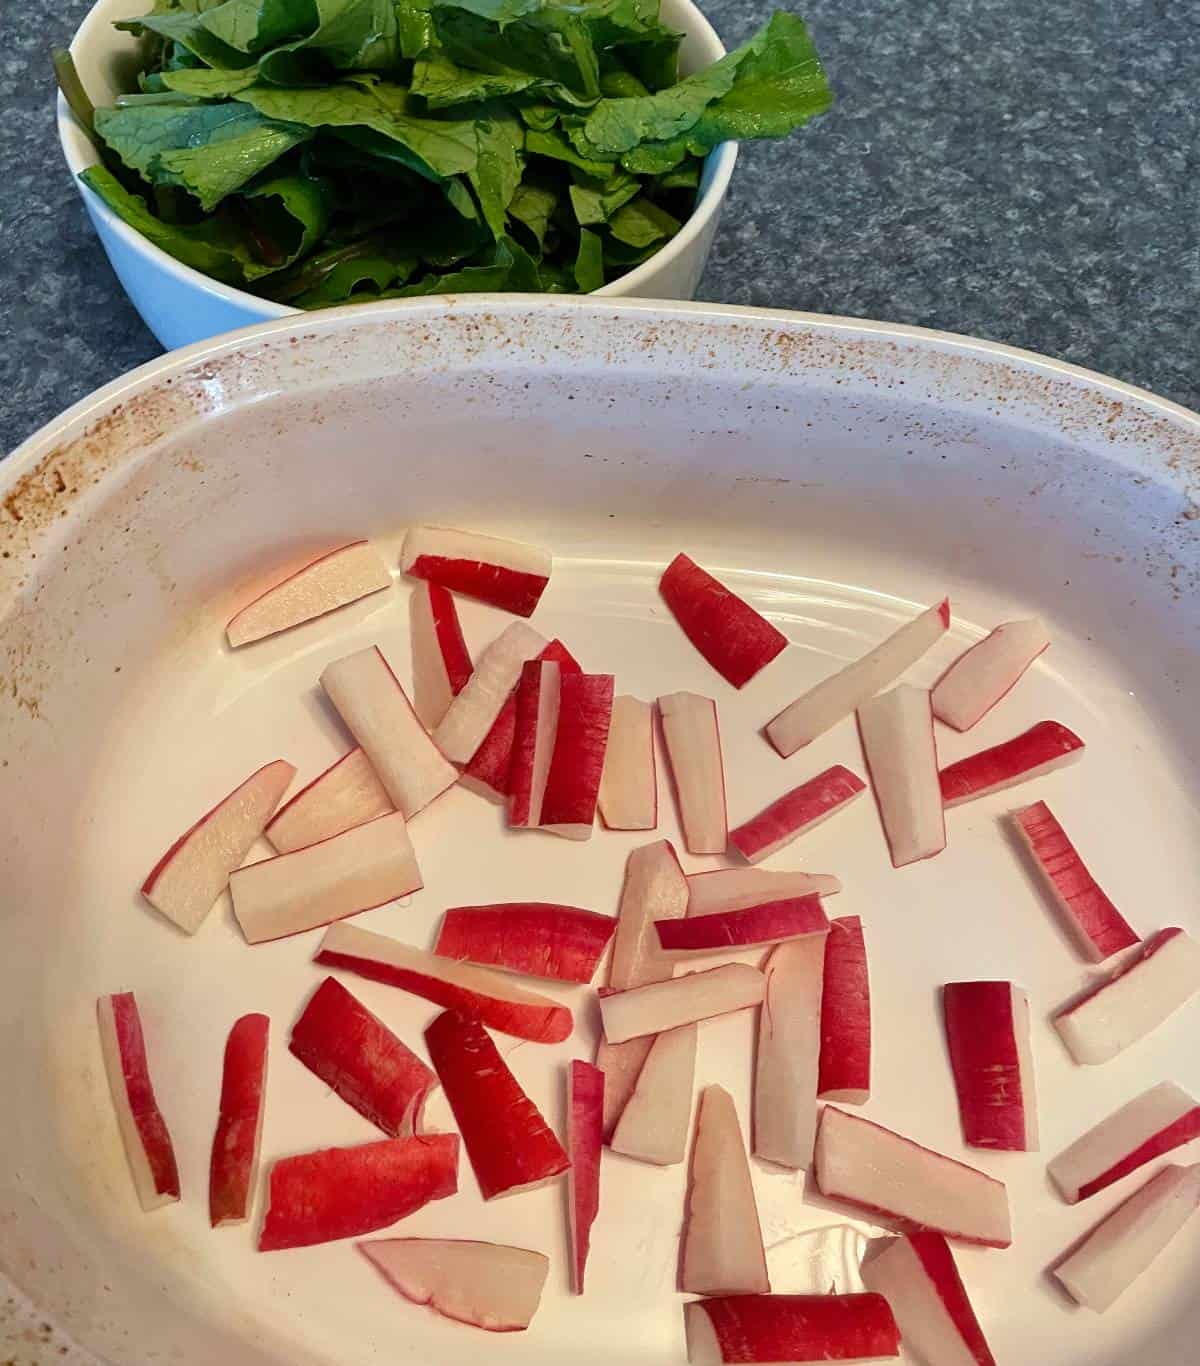 Chopped radish pieces in a white baking dish.